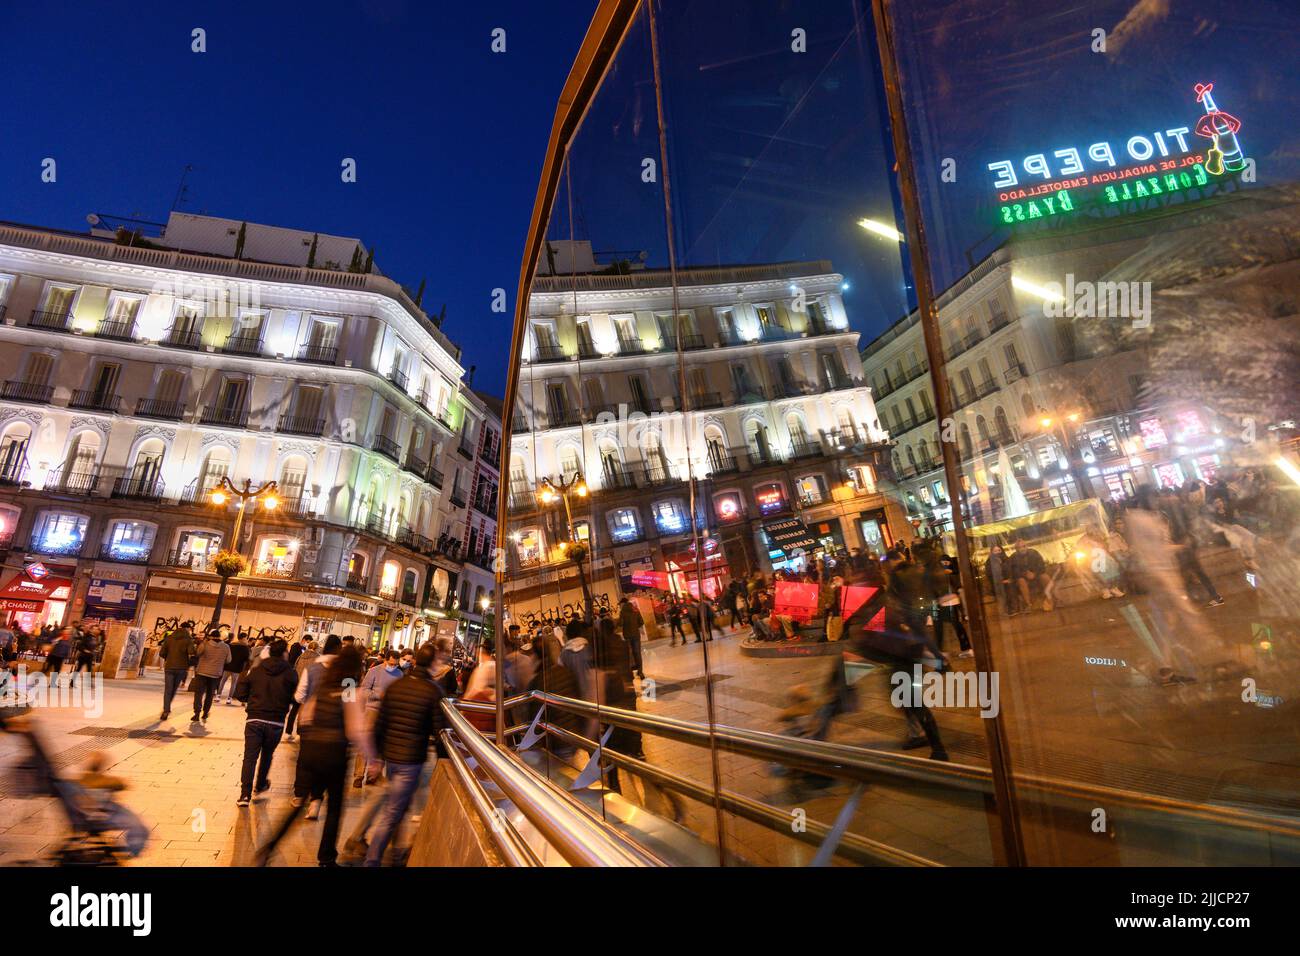 Crowds in The Puerta del Sol, at night with the famous Tio Pepe advertising sign reflected in the windows of the Sol Metro station.  Madrid, Spain. Stock Photo